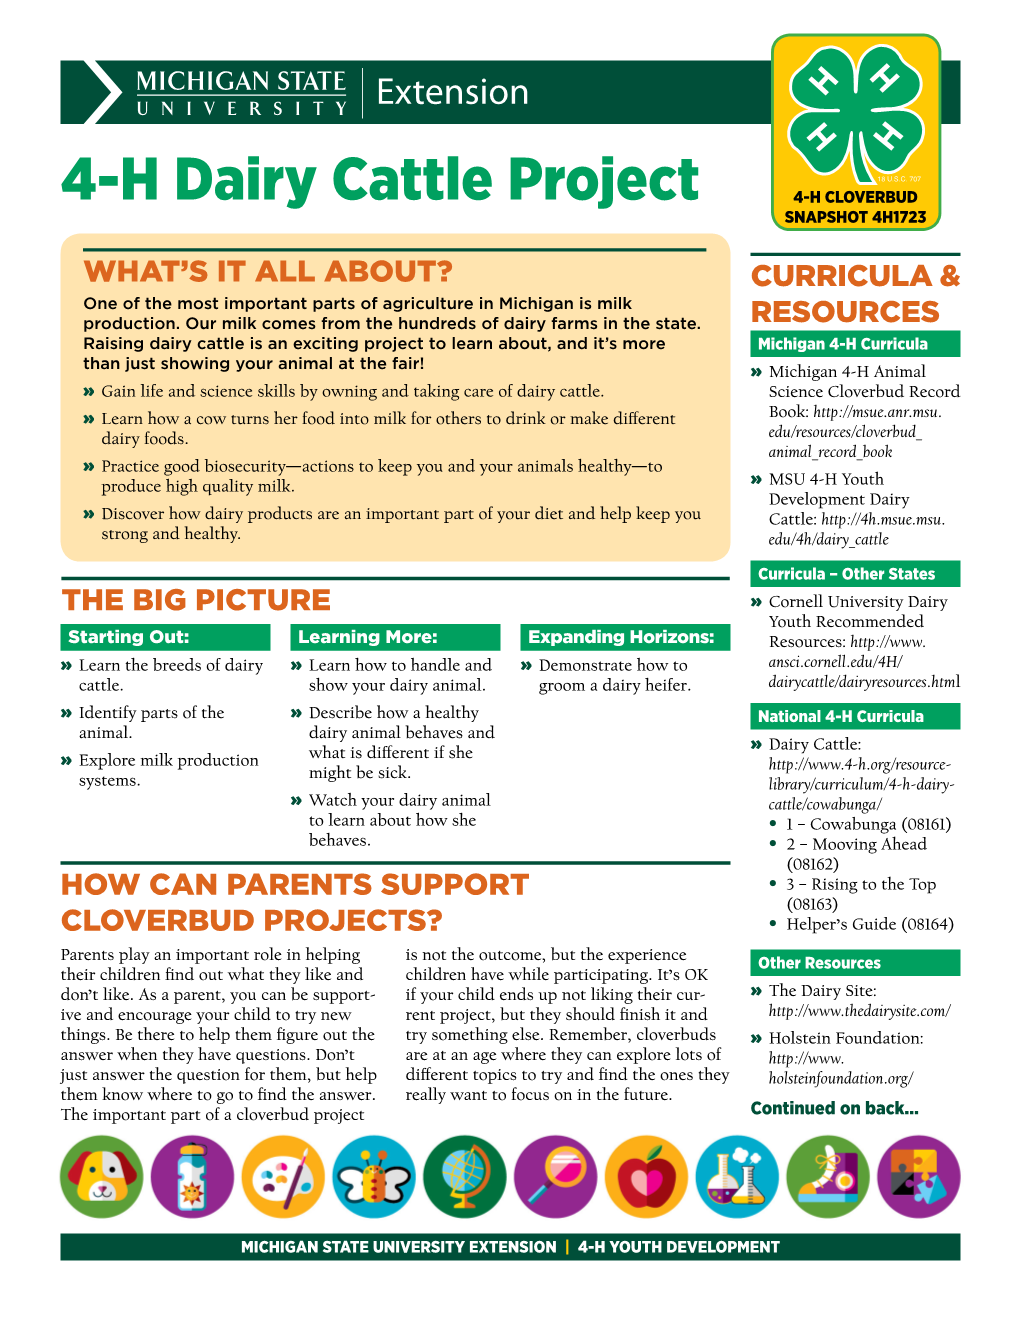 4-H Cloverbuds Dairy Cattle Project Snapshot